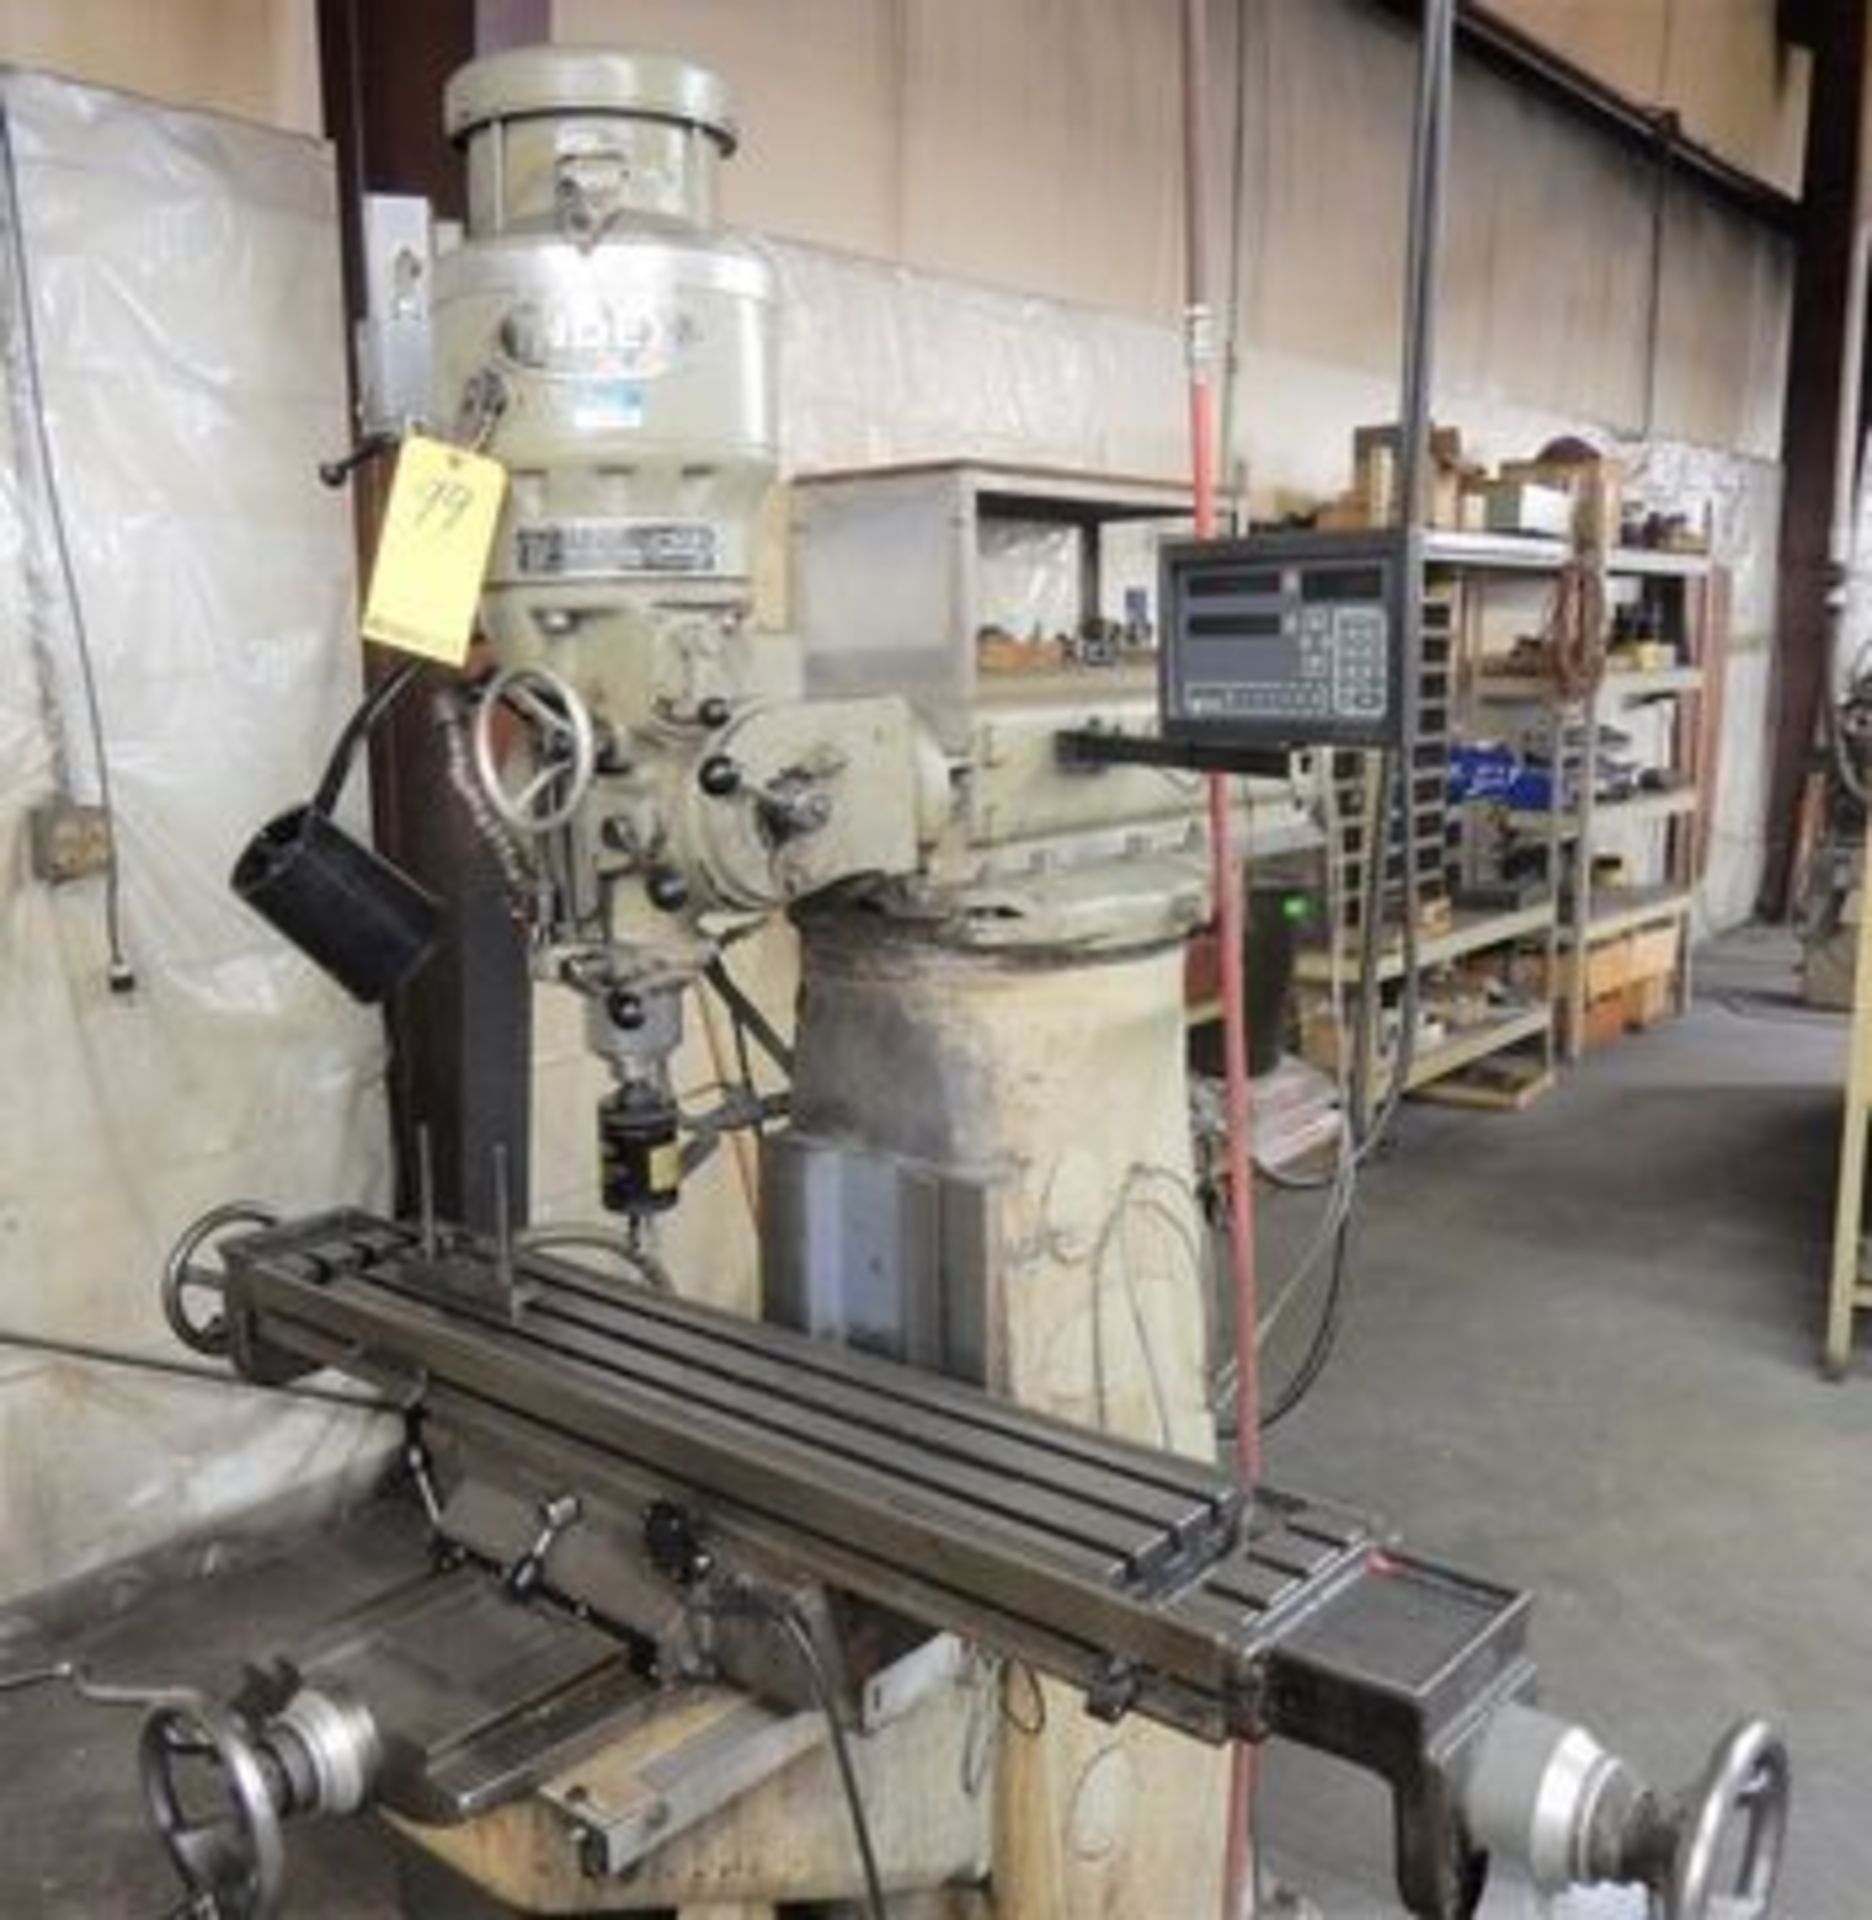 WELLS-INDEX, VERT. MILL, M# 747, S/N 19954, NEWALL 2-AXIS DRO, V.S., 9" X 46.5" TABLE